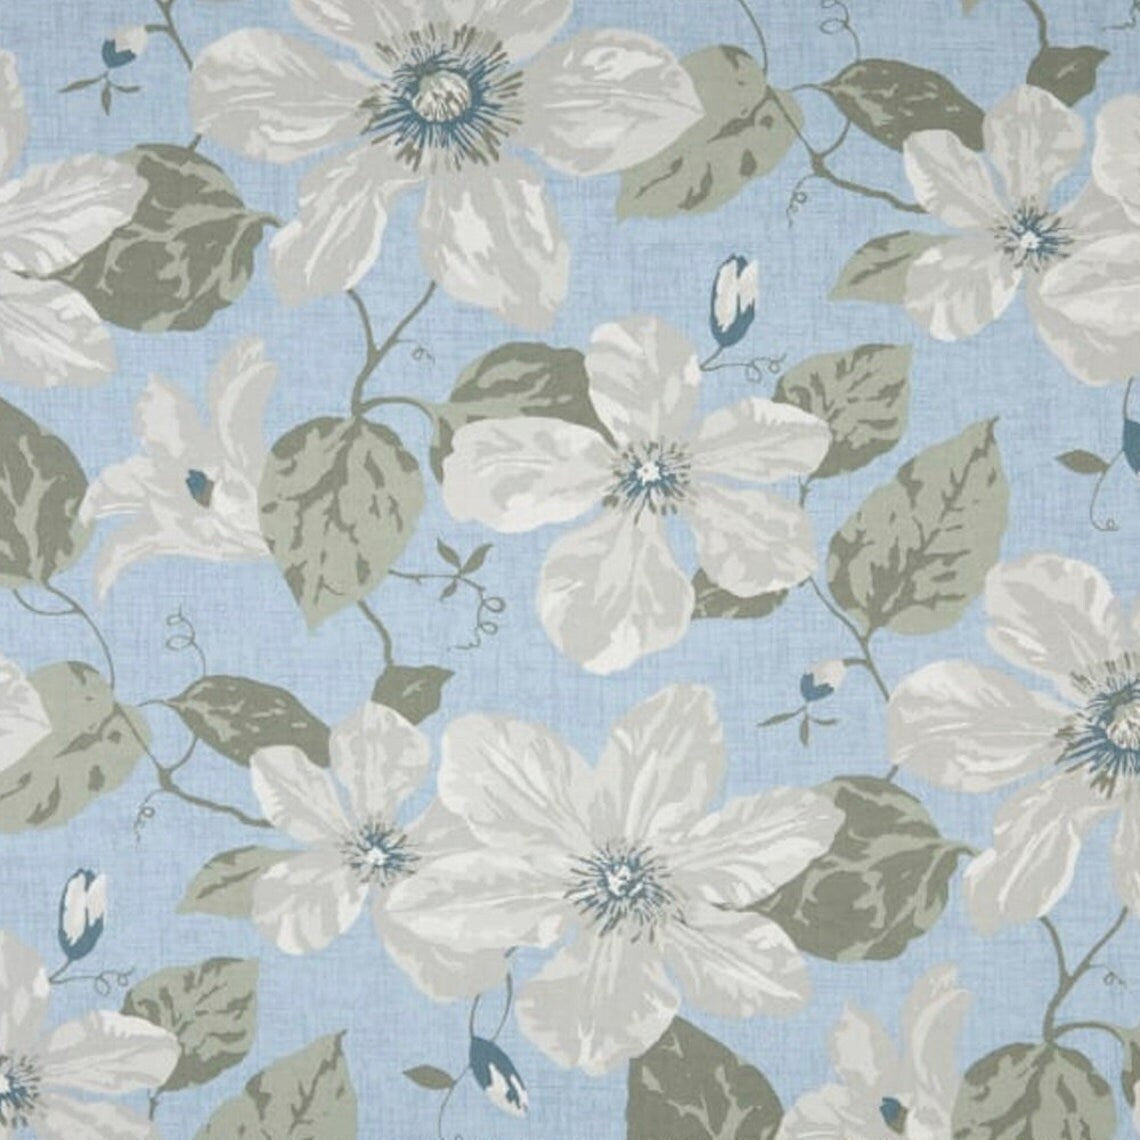 tie-up valance in nelly antique blue floral, large scale